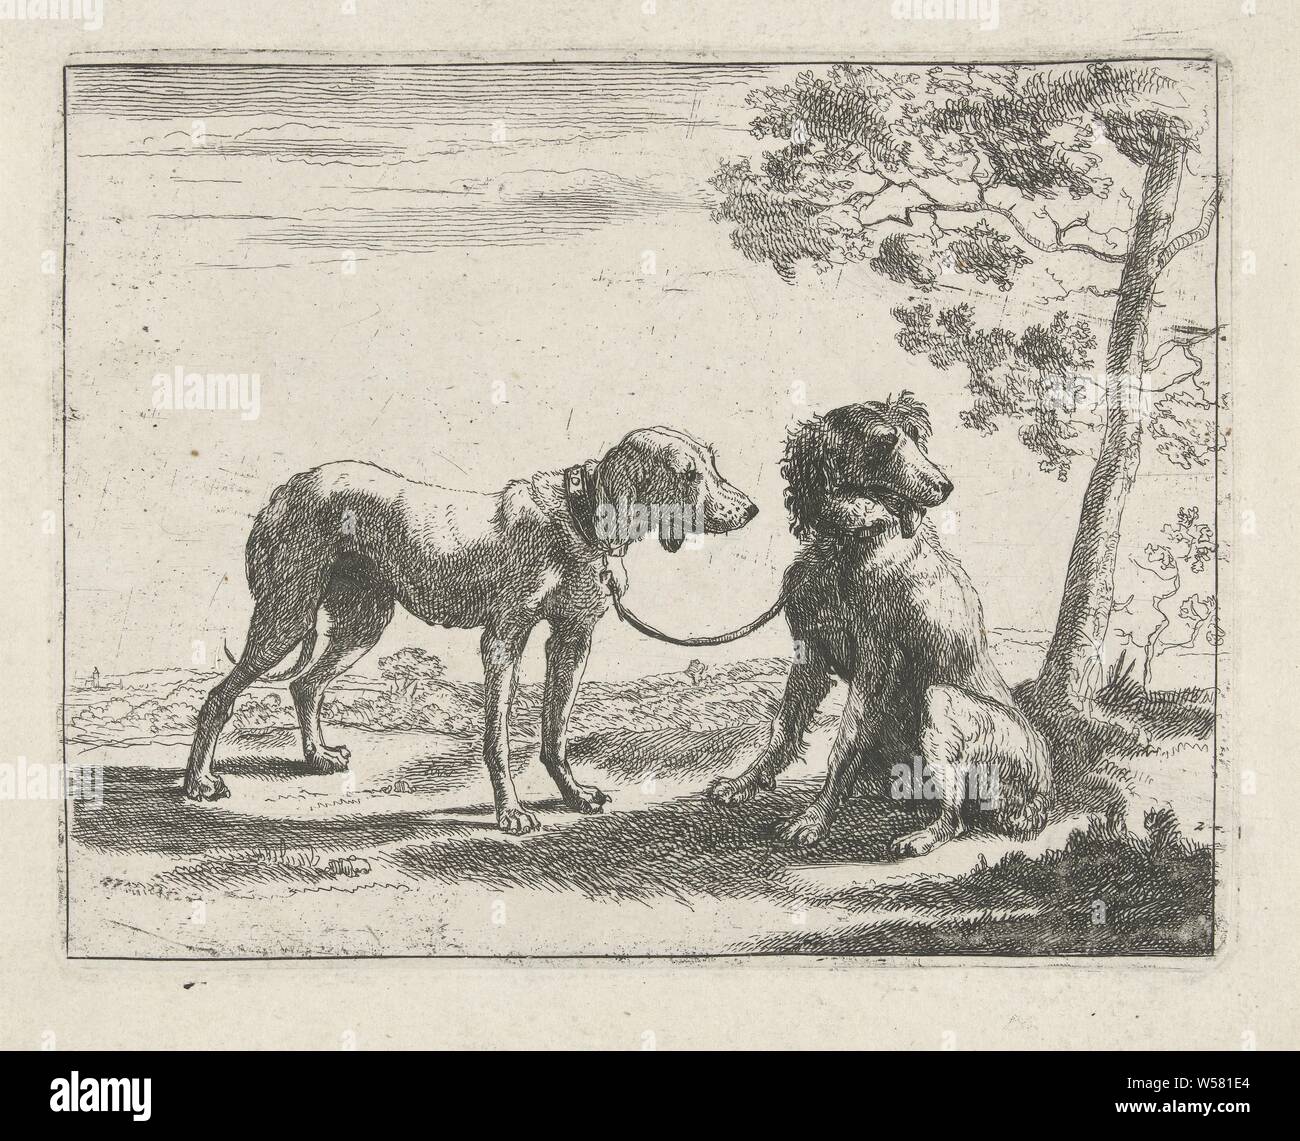 Two dogs Dogs (series title), Two dogs tied together in a landscape. Second  print of a series of eight prints with representations of dogs., Dog,  Pauwels van Hillegaert, Amsterdam, 1654, paper, etching,